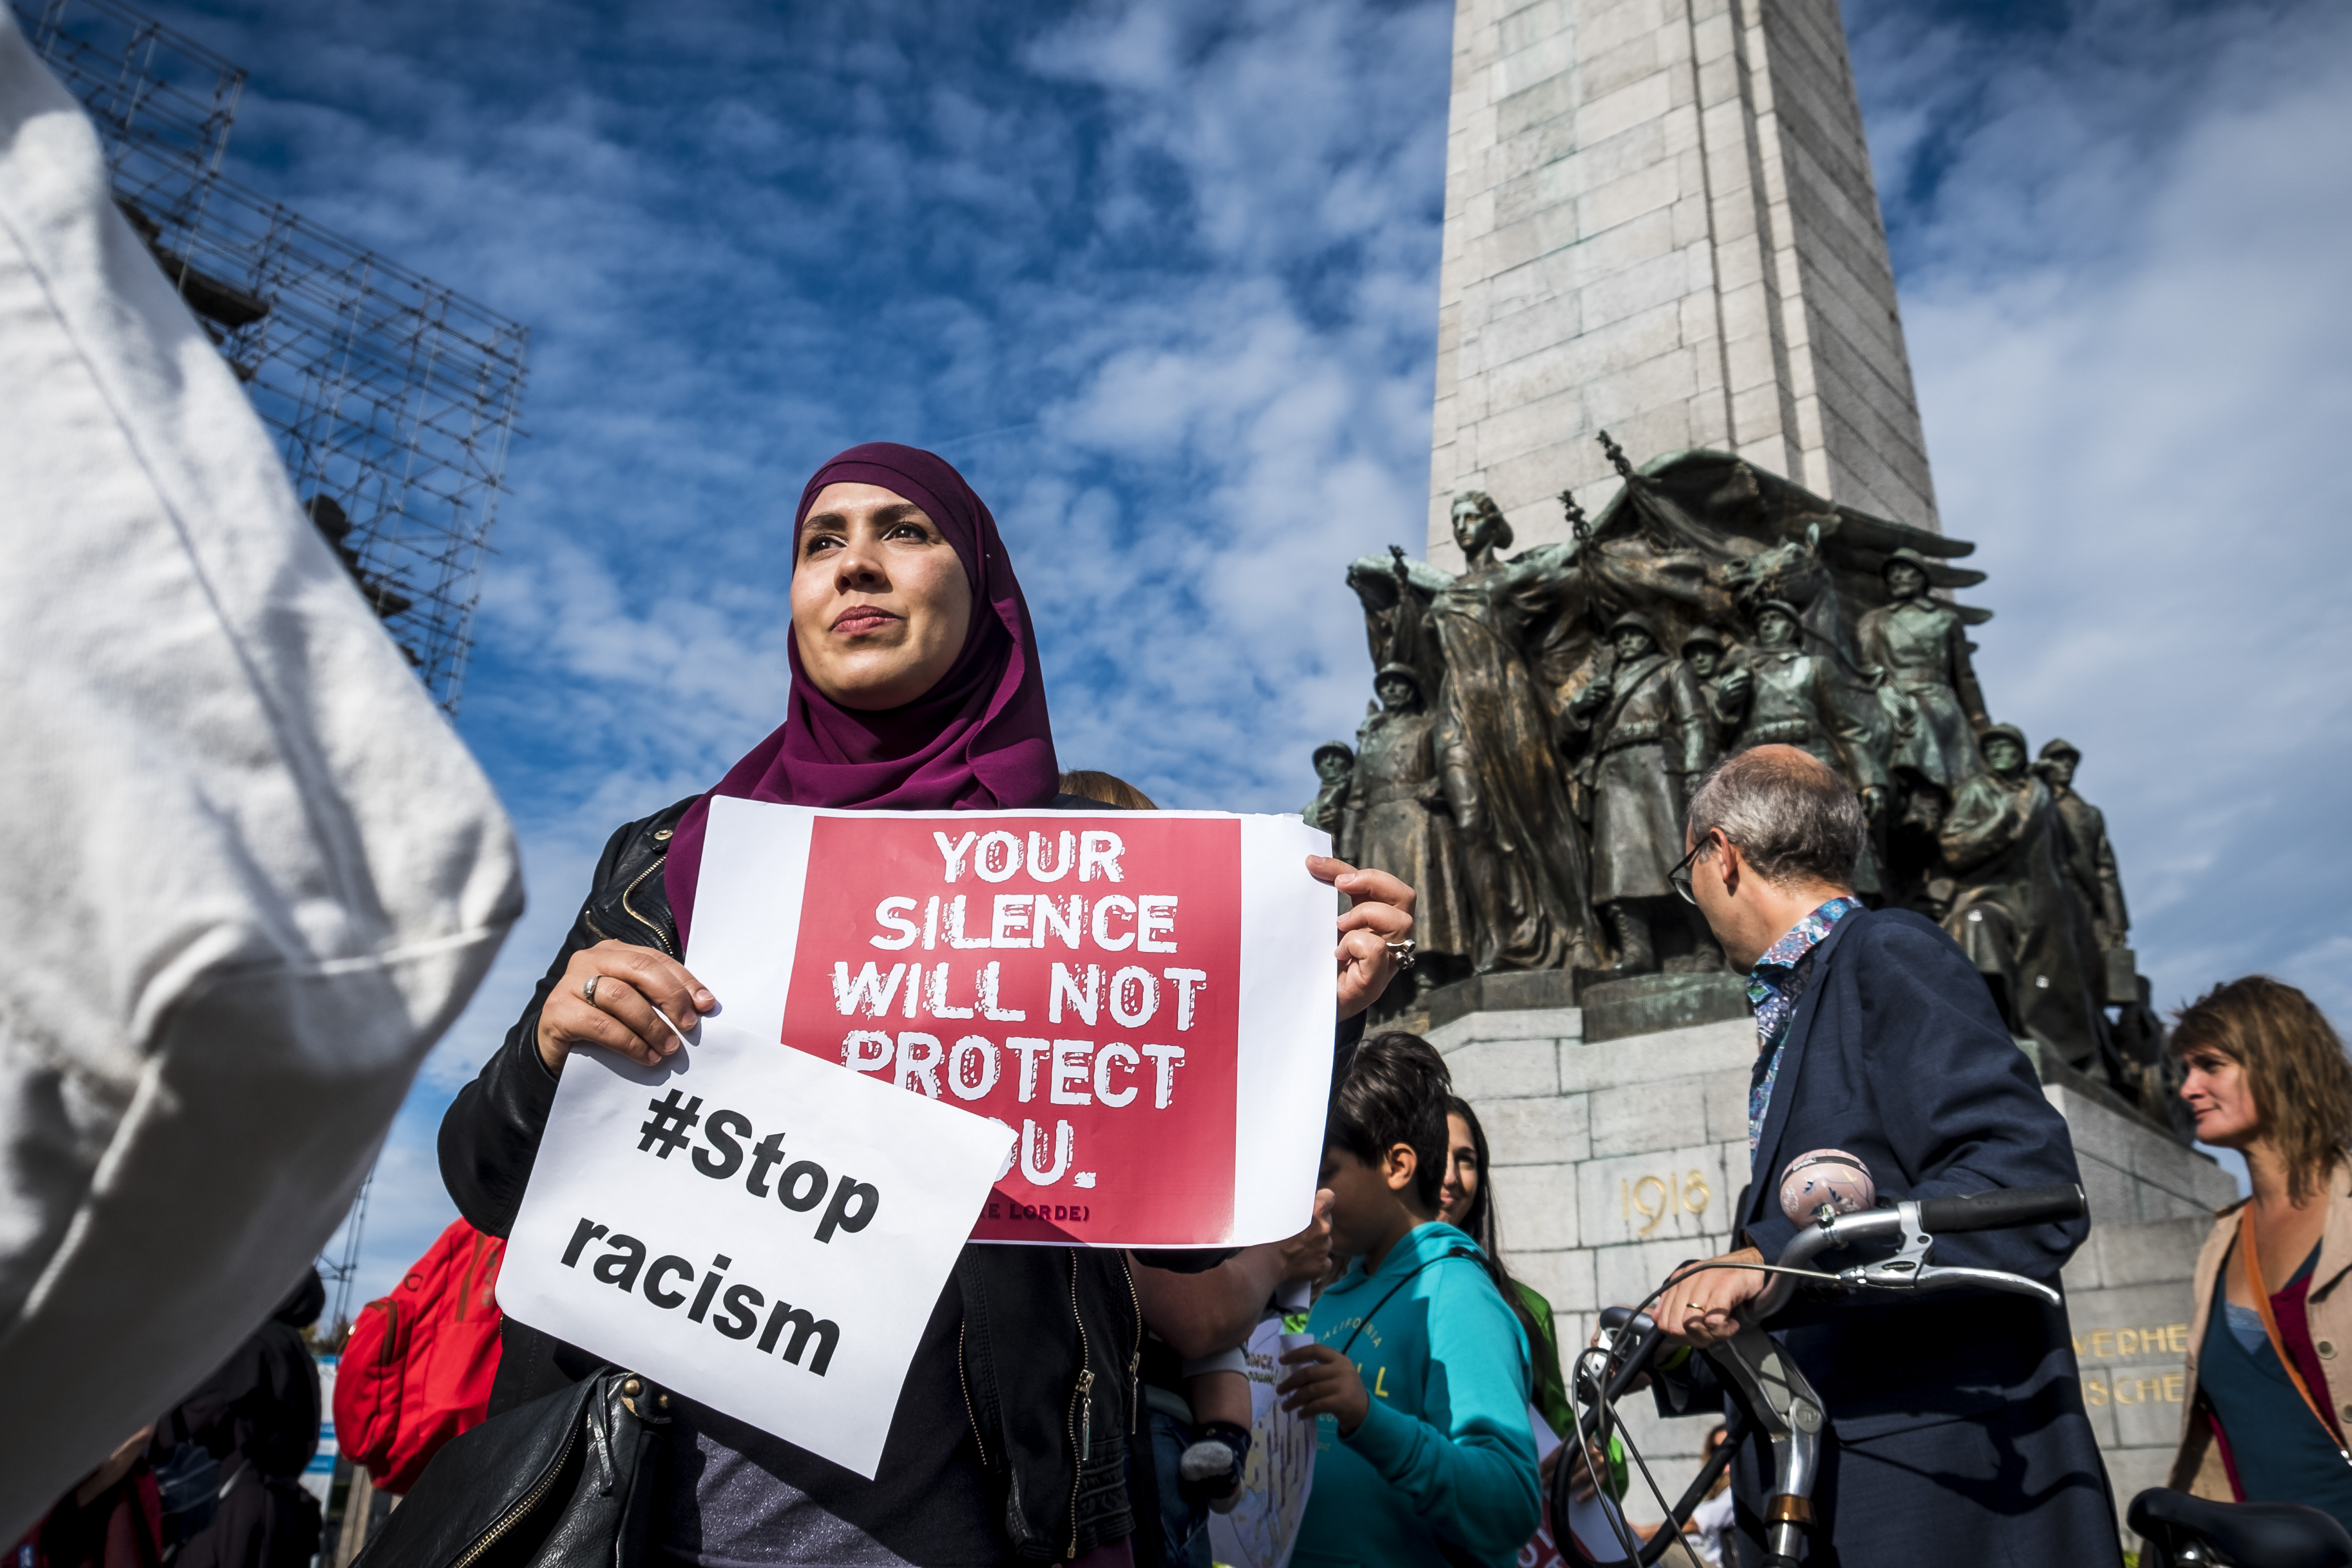 People hold posters as they protest against 'hate and islamophobia' in Brussels (AFP)